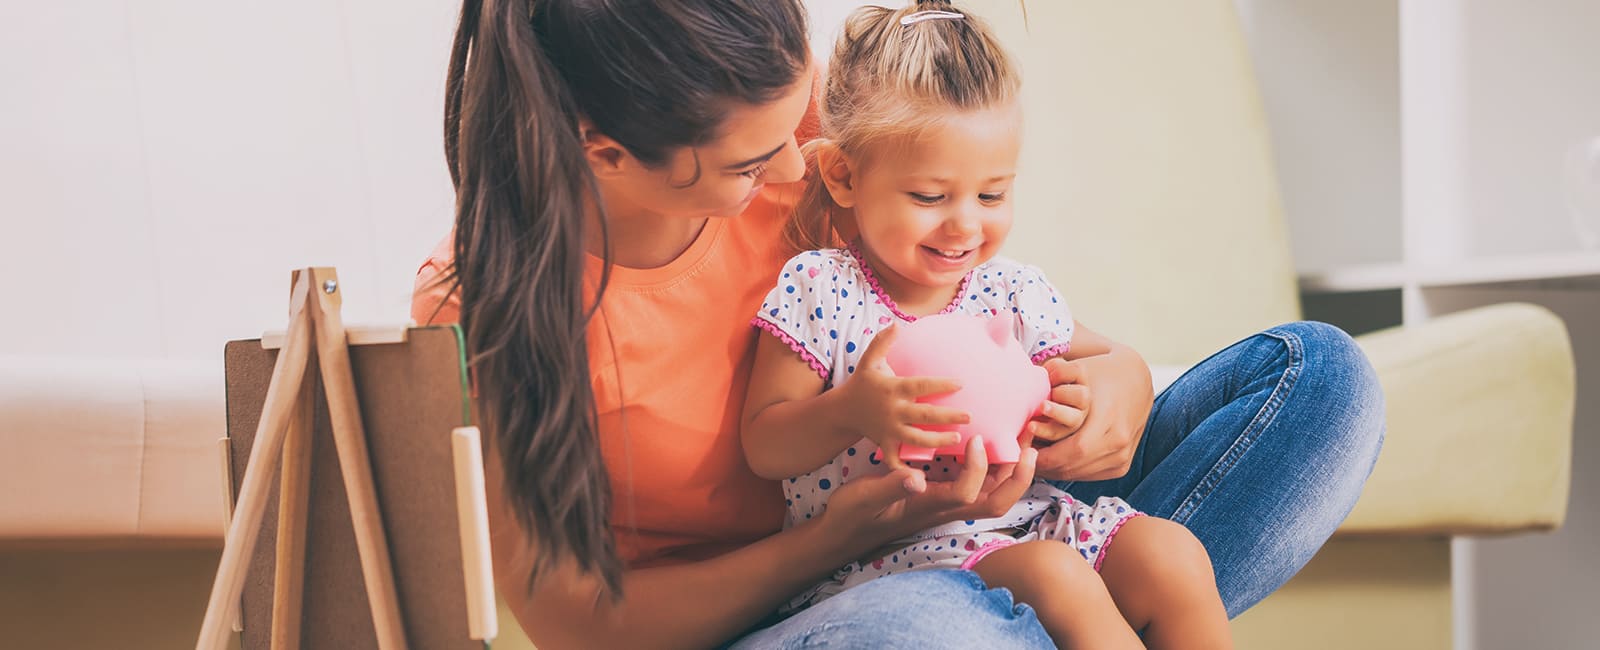 mom holding young daughter with piggy bank